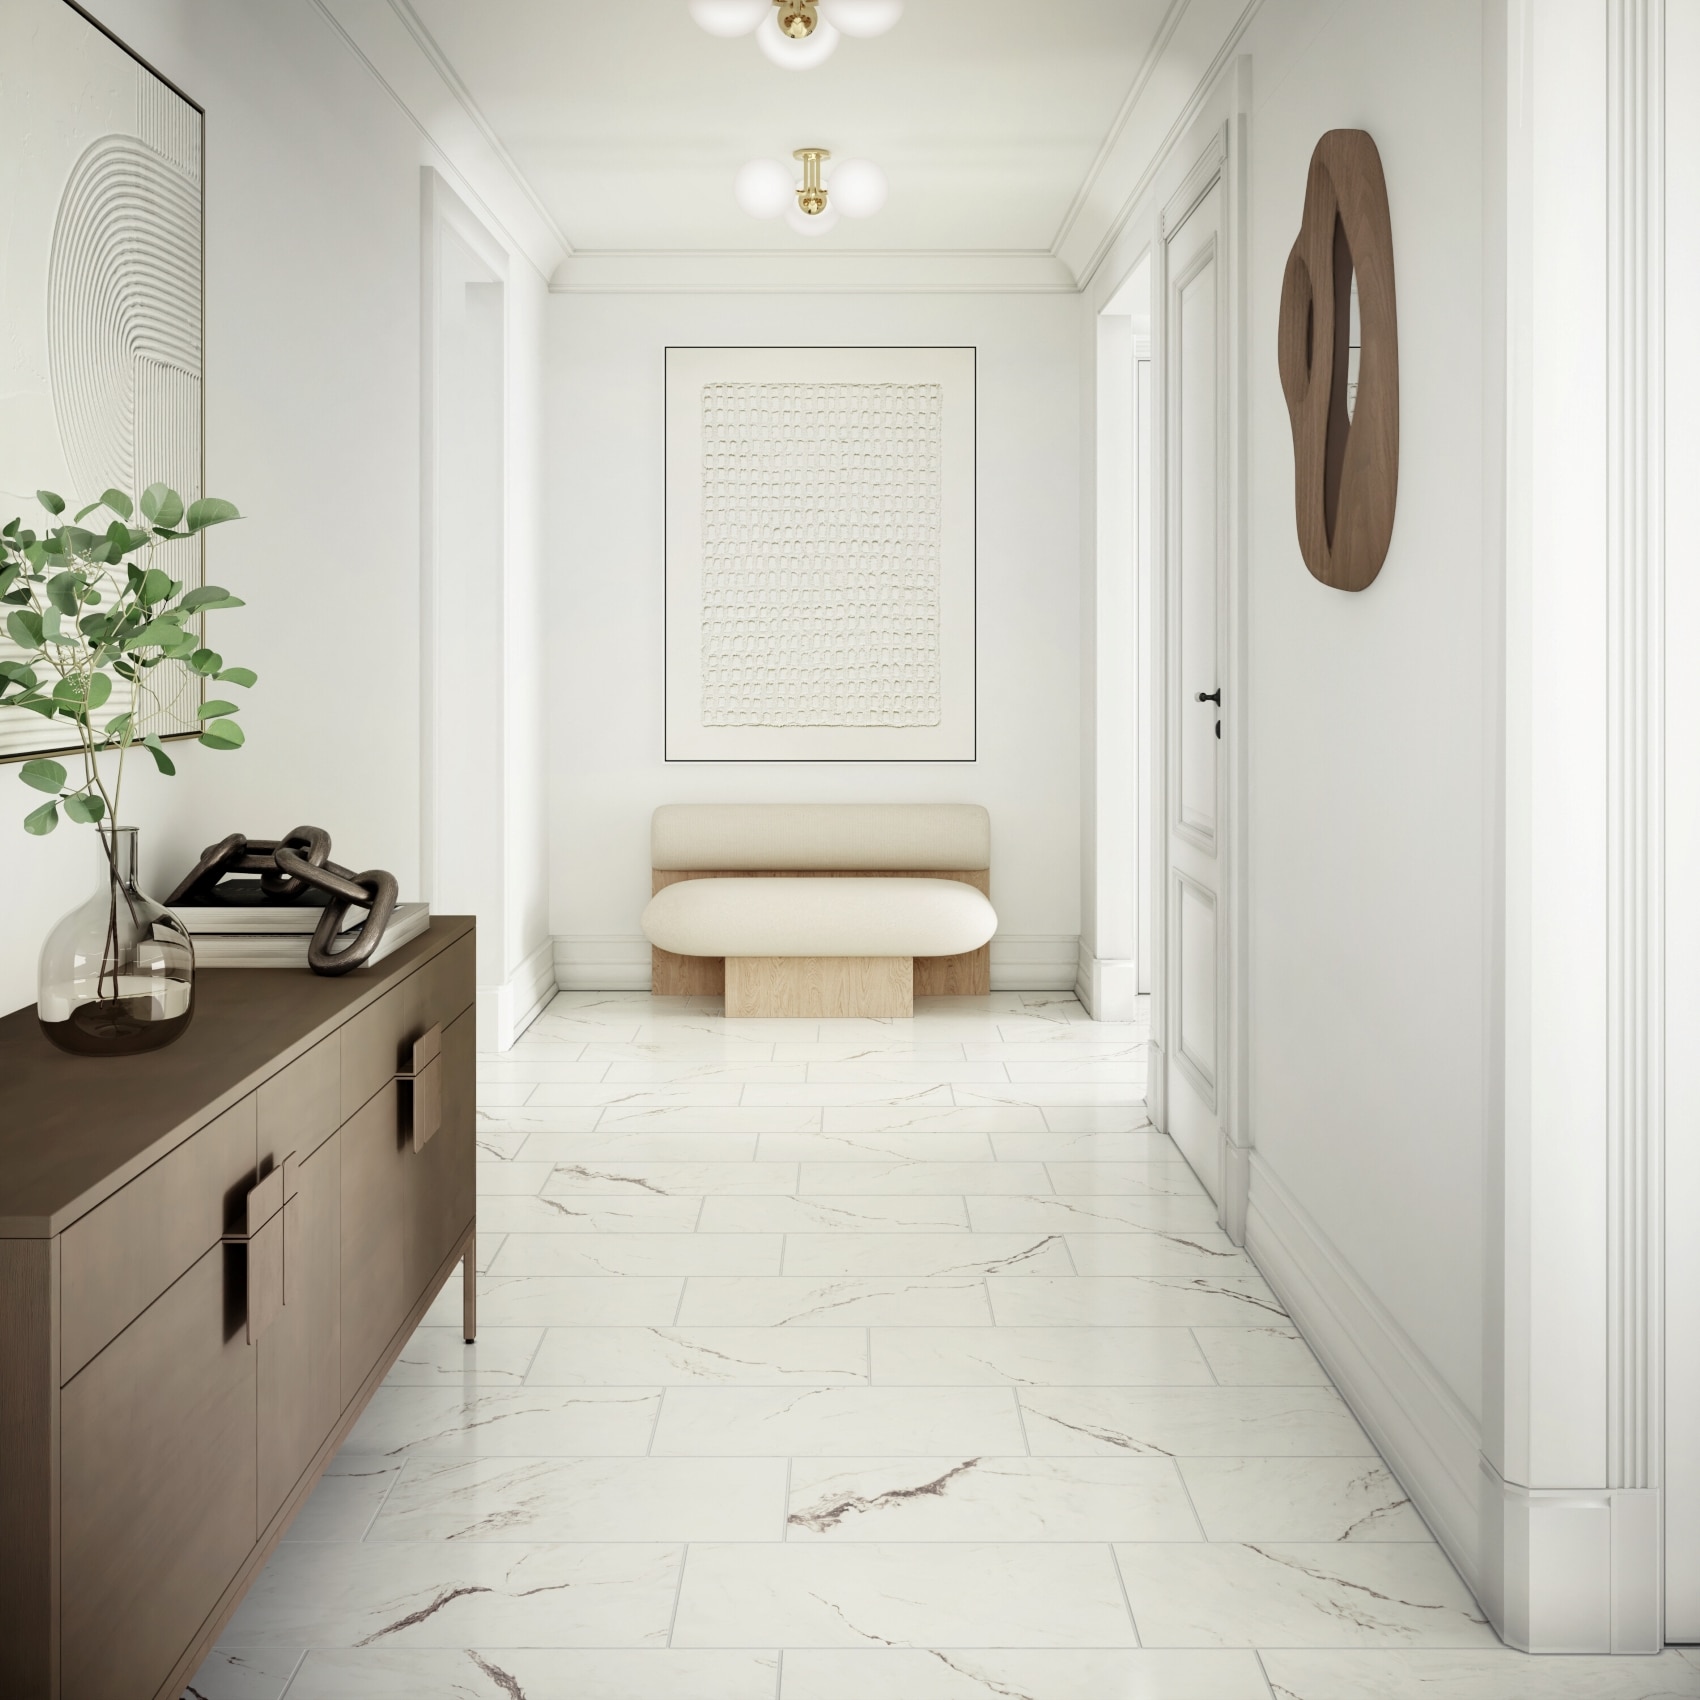 Residential home hallway with marble flooring and a bench seat at the end.